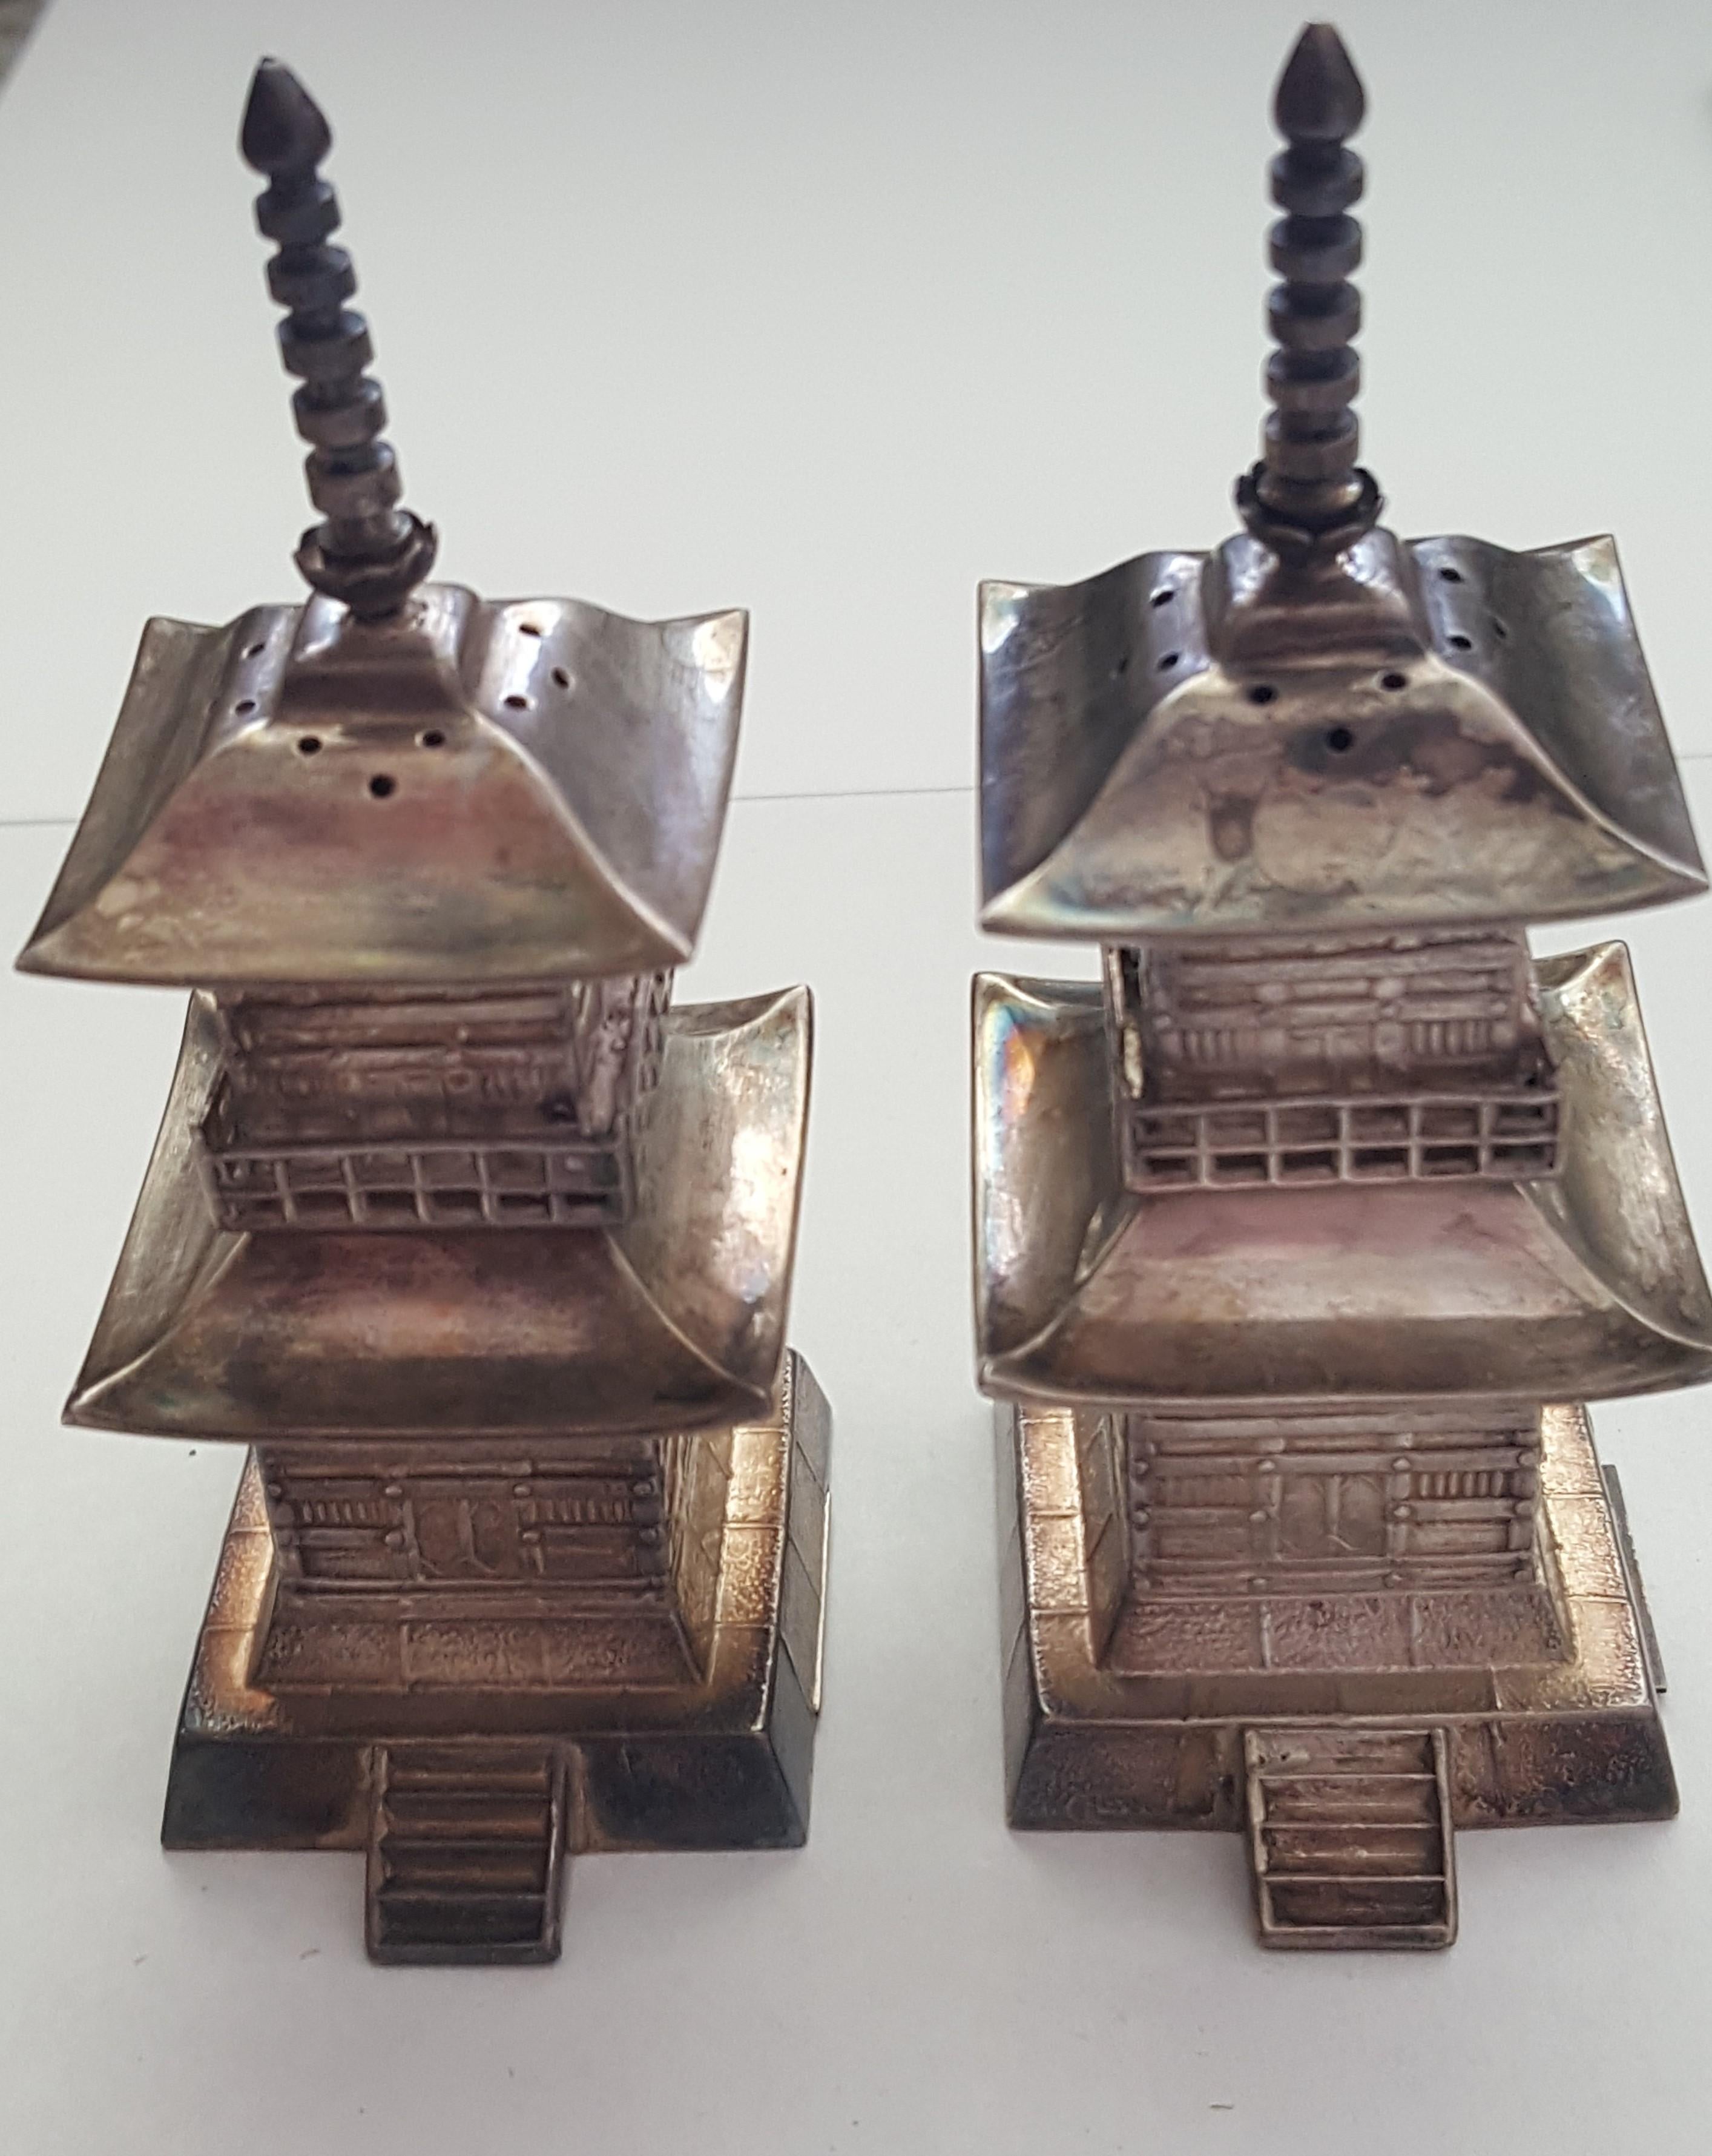 Vintage Japanese Sterling Salt and Pepper Shakers Pagoda Okubo, Excellent Condition, 72.2 Grams, 3 1/4 Inches tall, I + Inch Square Wide

These salt and pepper shakers make a nice addition to a silver collection. We are selling other Asian salt and